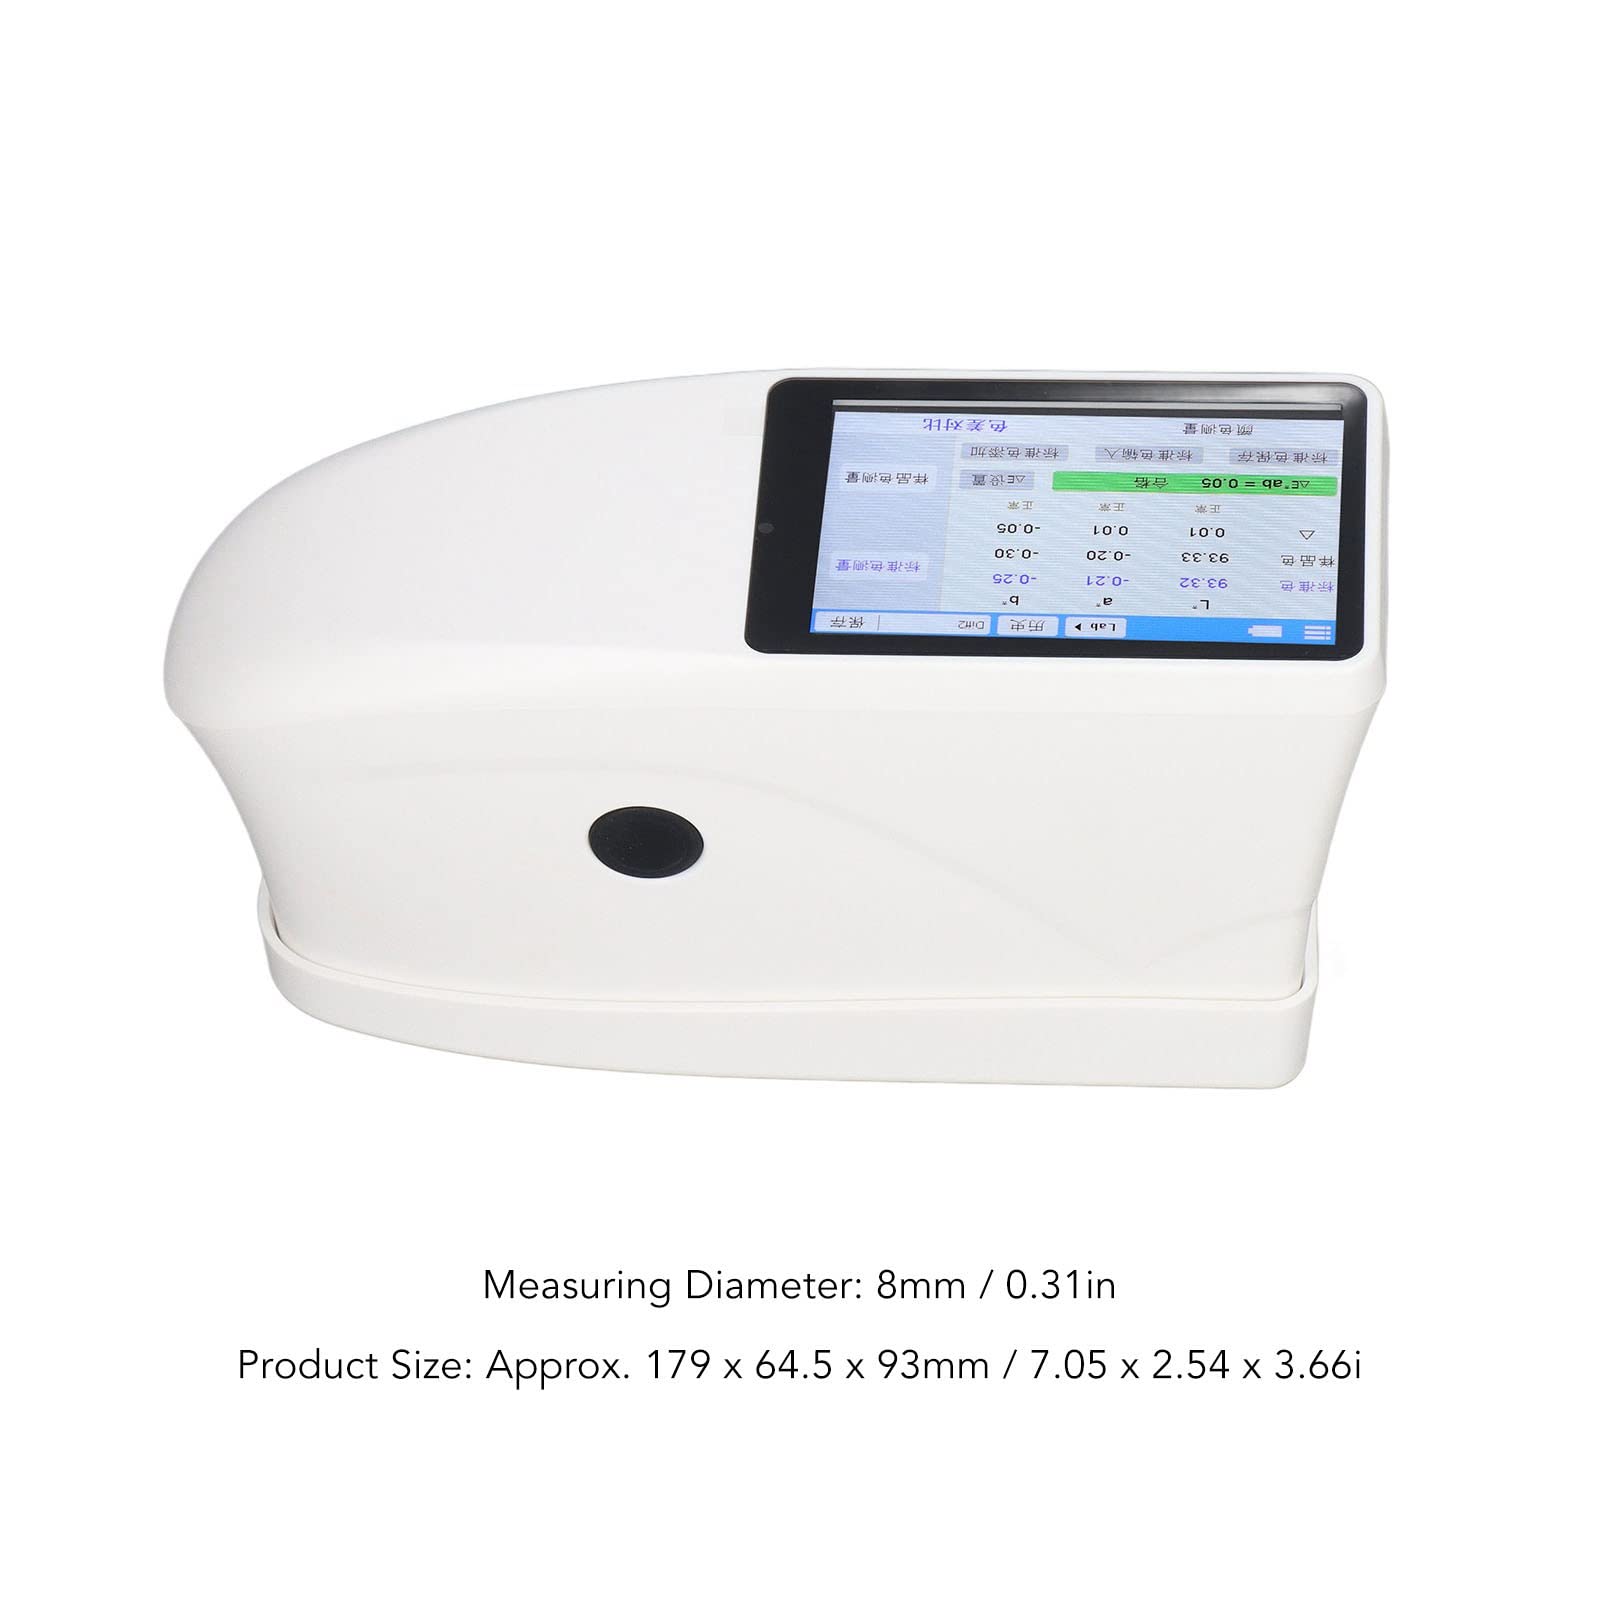 Spectrophotometer, Whiteboard Calibration Accurate Digital Portable Color Difference Tester with Software for Whiteness Yellowness